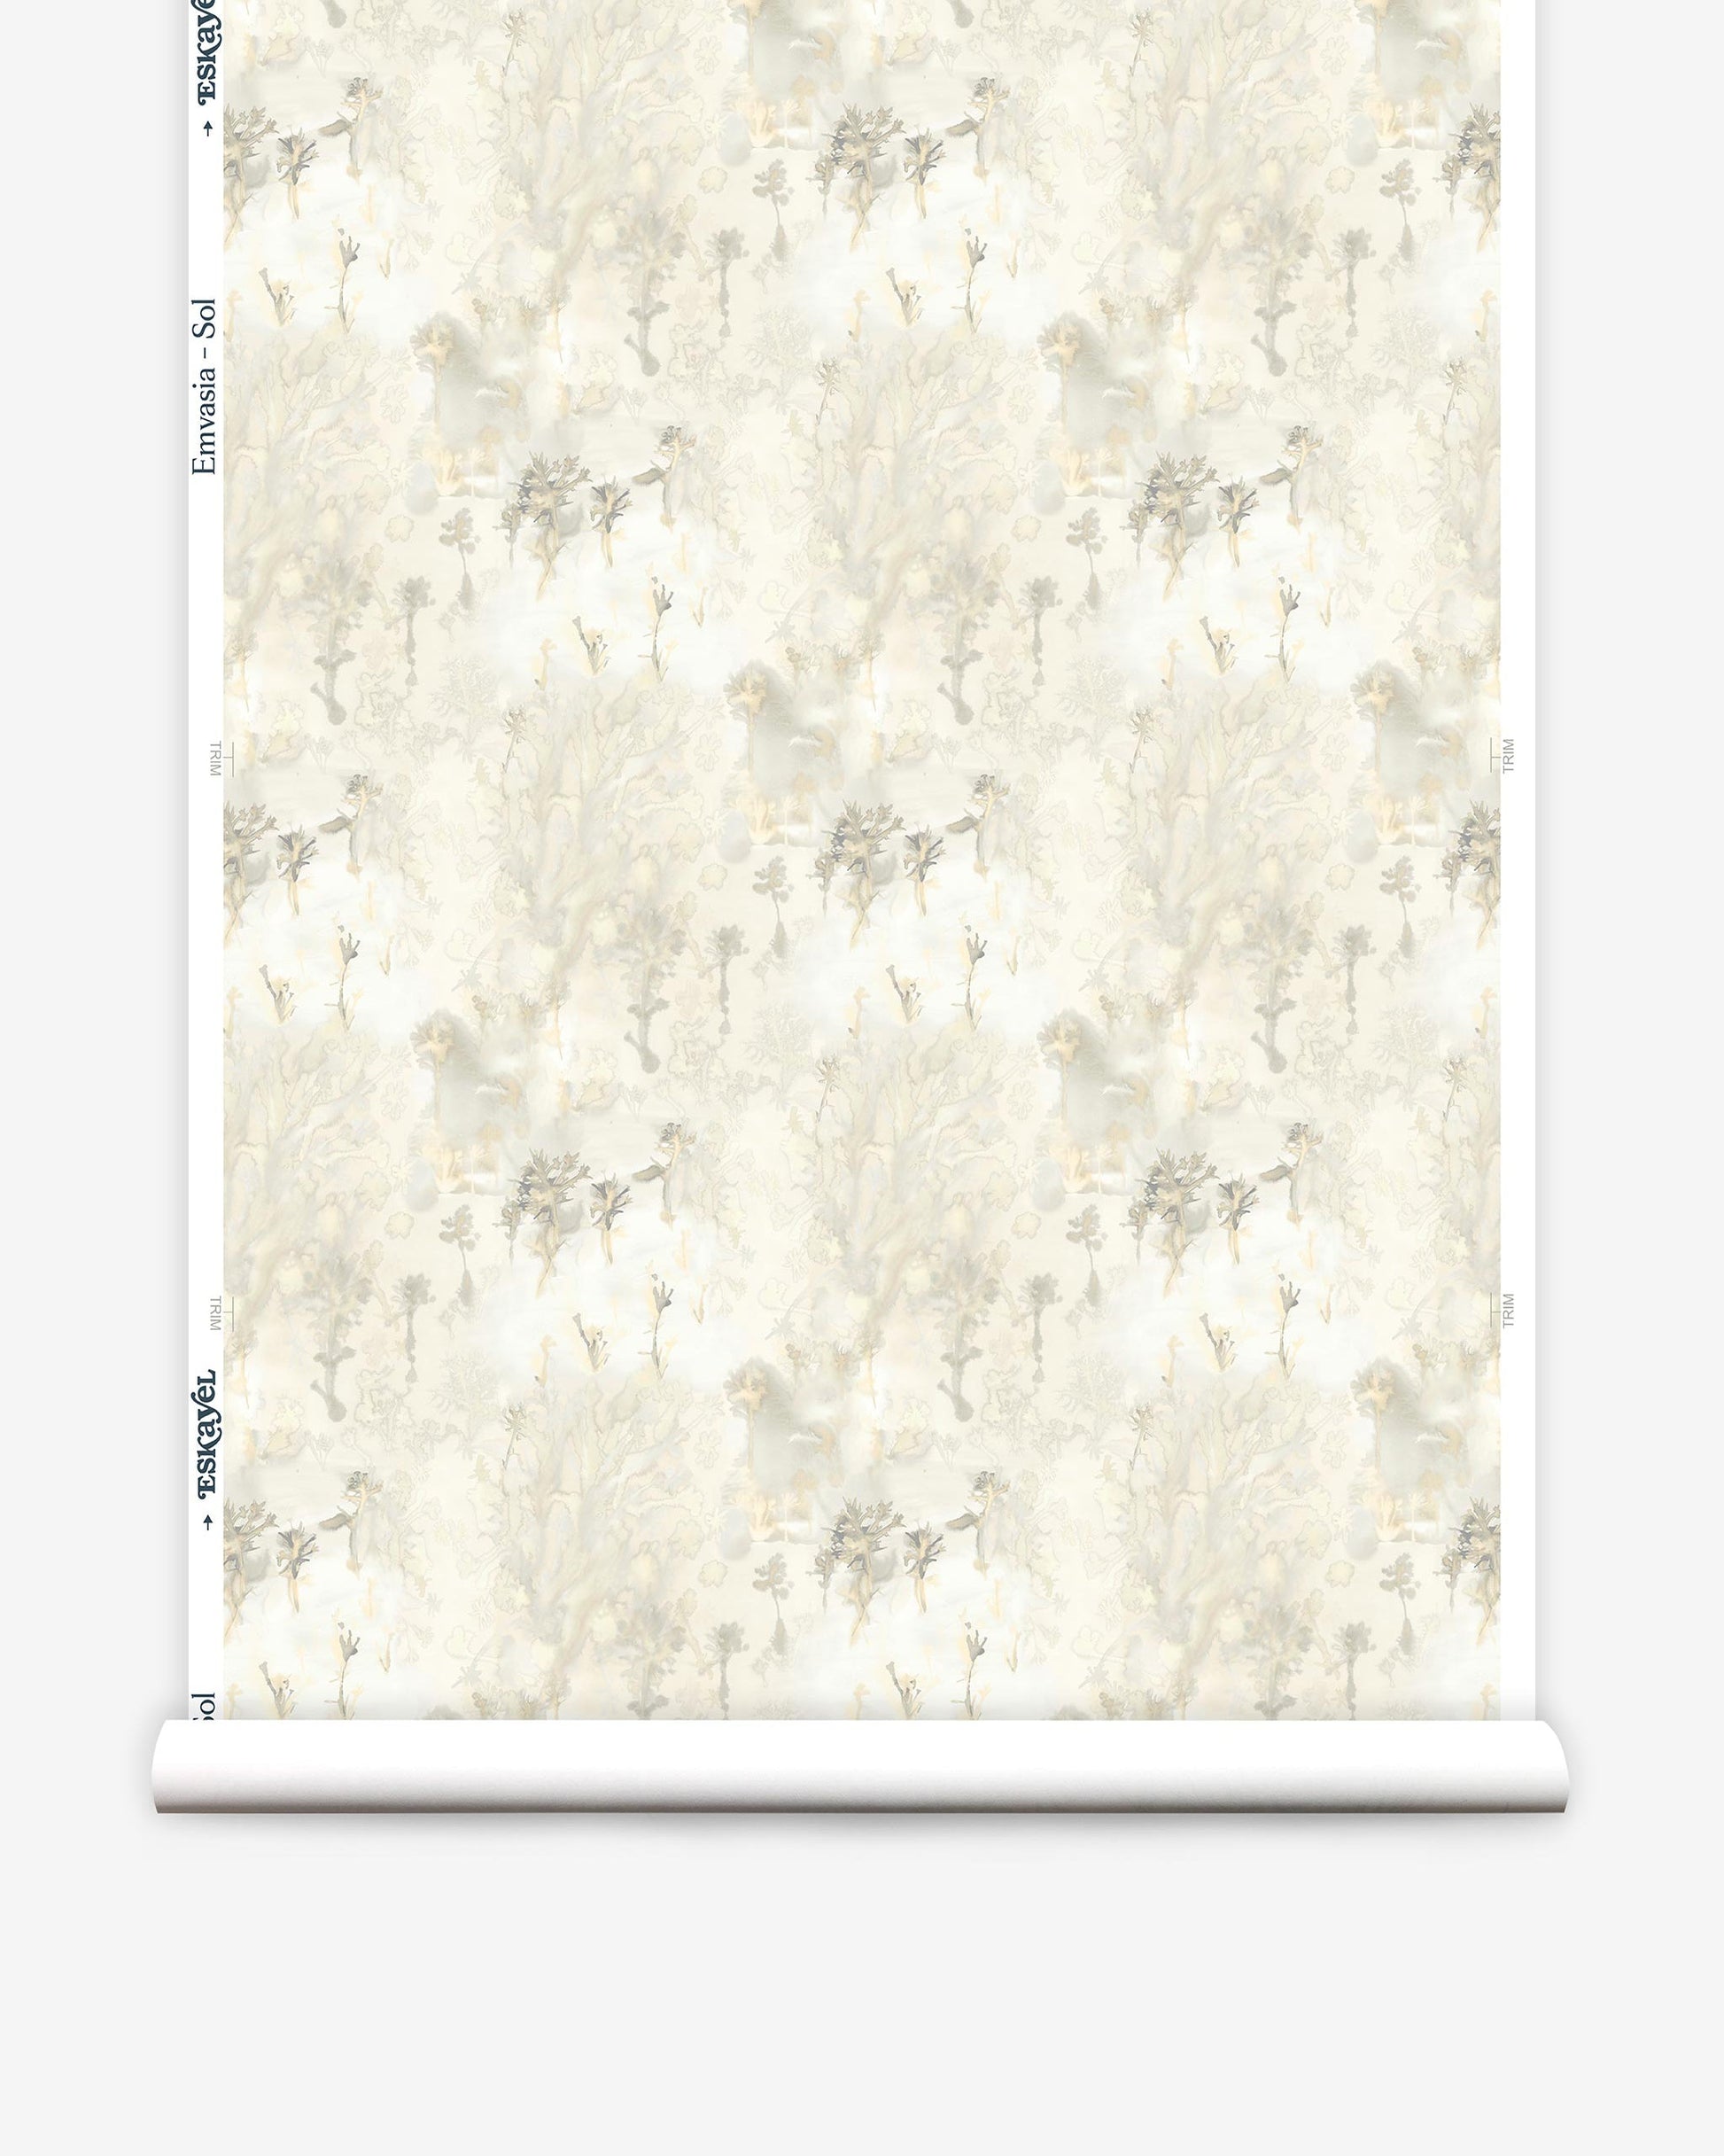 A roll of Emvasia Wallpaper Sol with a beige and white floral pattern